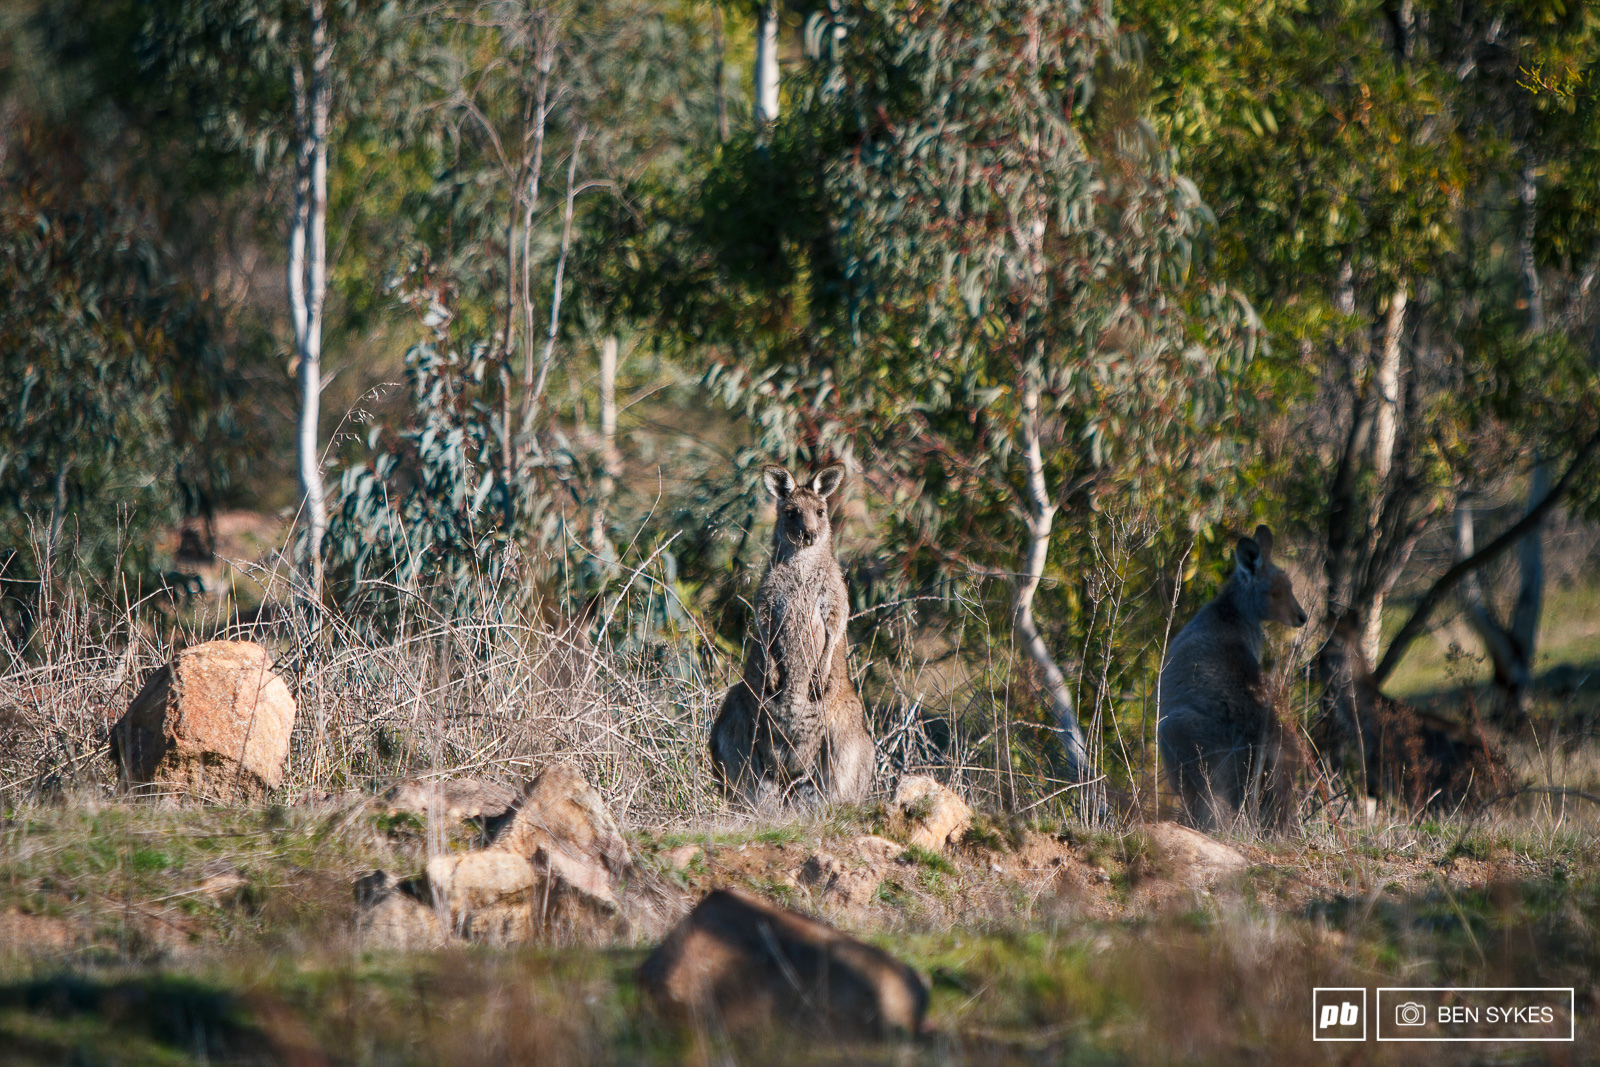 A Roo joining in on the spectating.